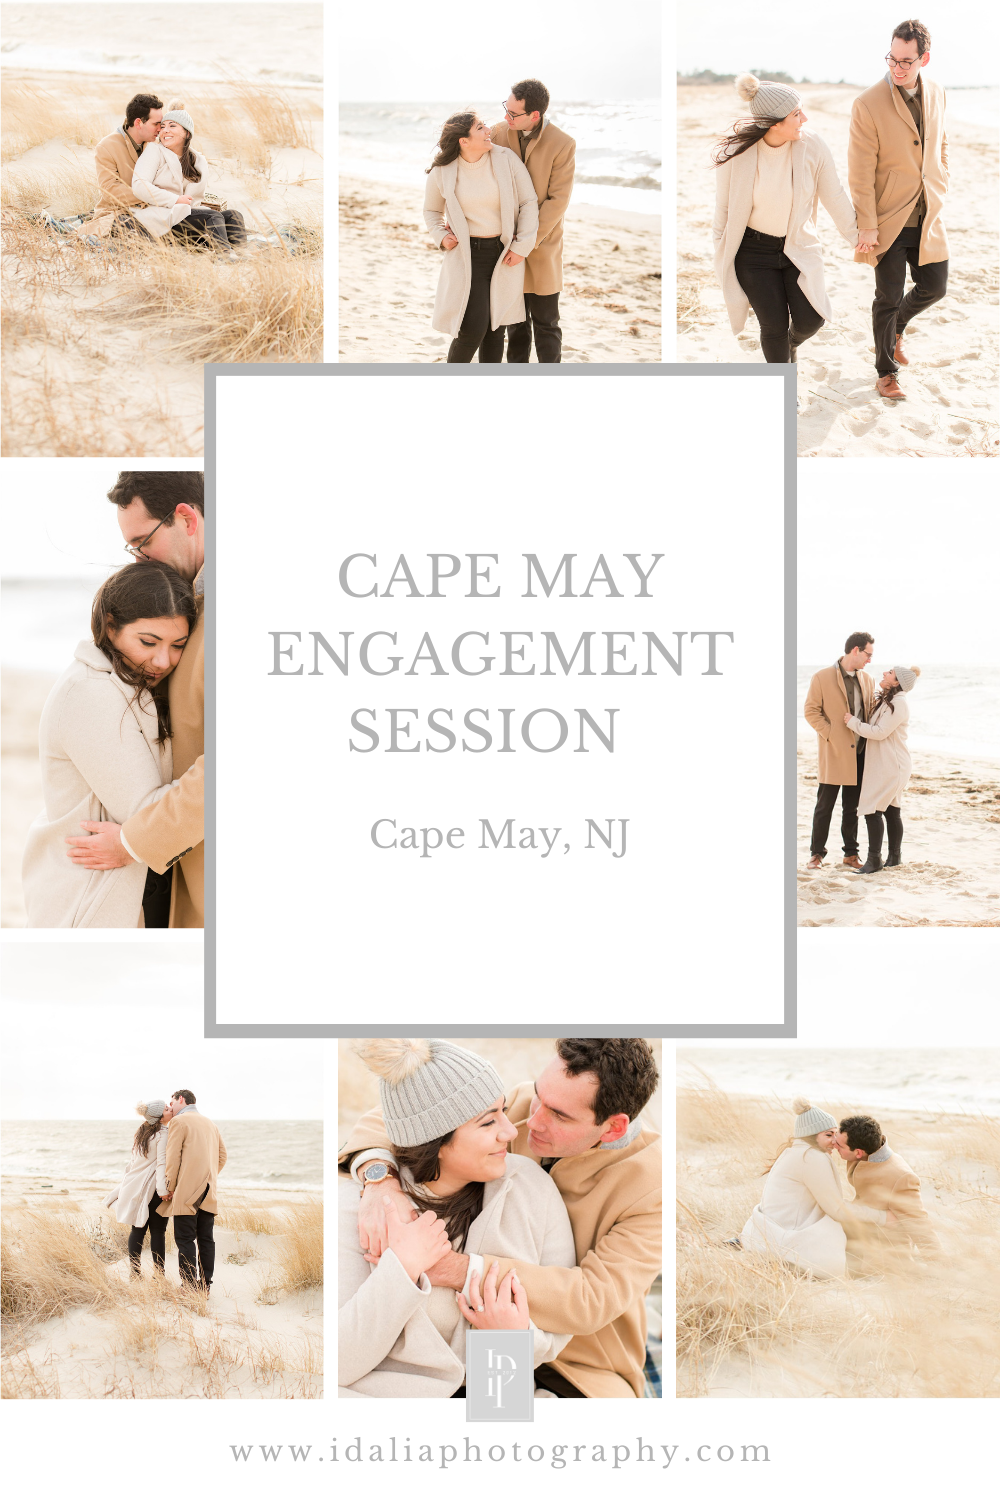 Cape May engagement session in the winter